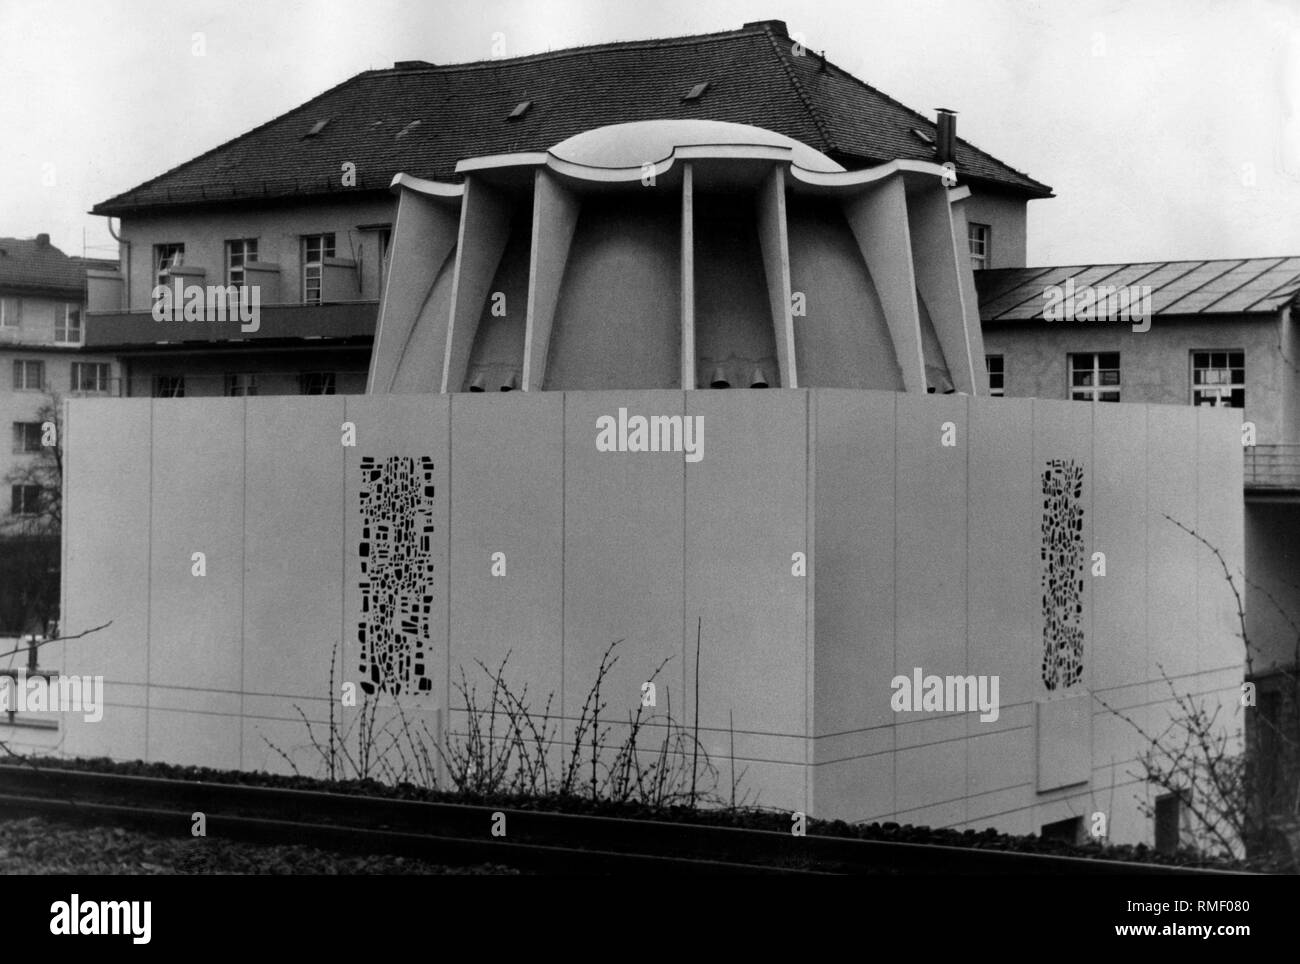 The new synagogue in Wuerzburg, which was inaugurated on 24.03.1970. The old synagogue was destroyed in 1938 by the National Socialists. Stock Photo